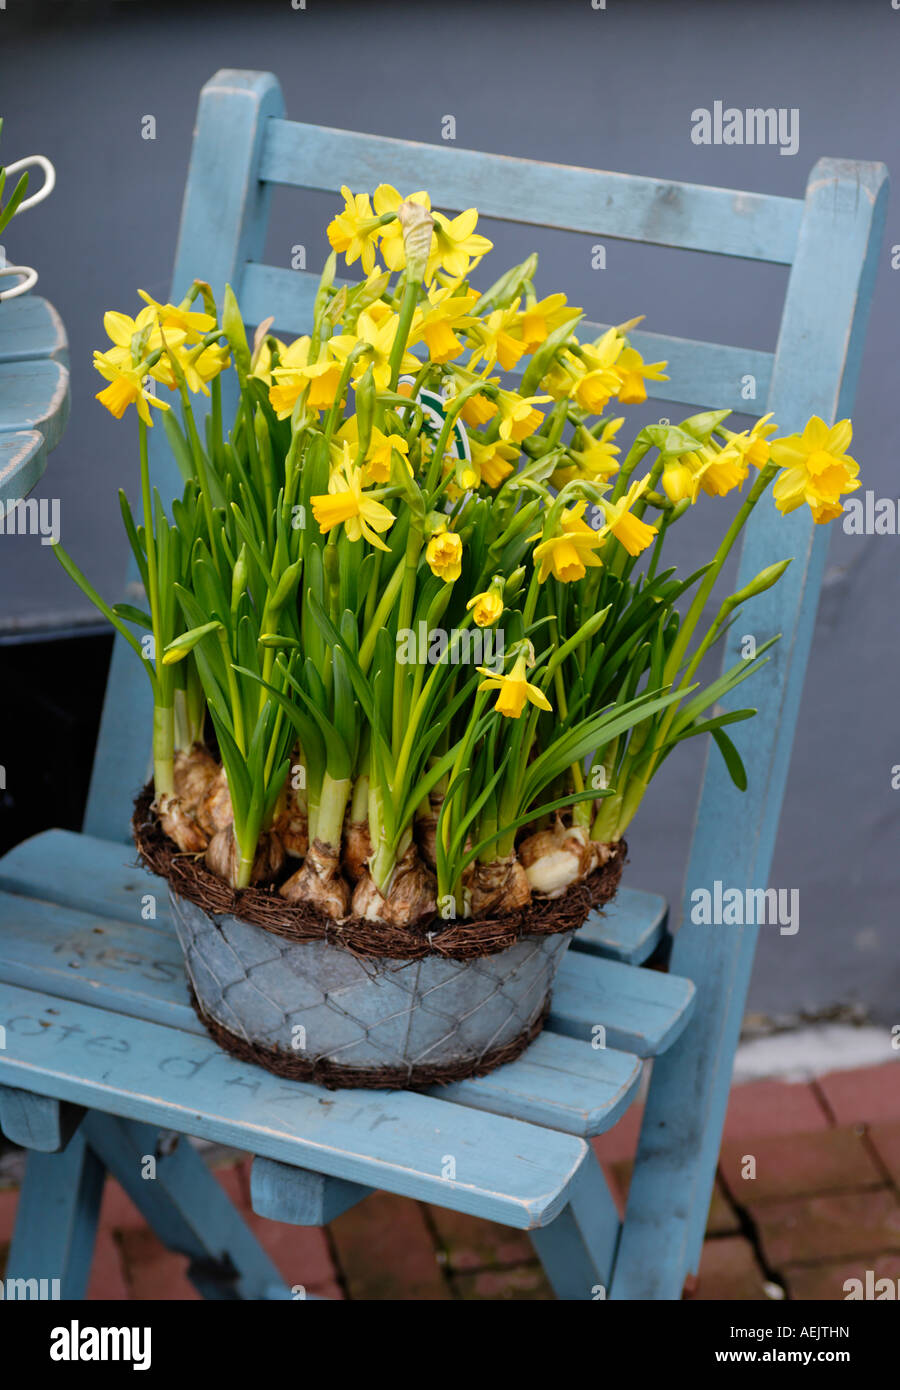 Spring flowers Daffodil Narcissus arrangement Stock Photo